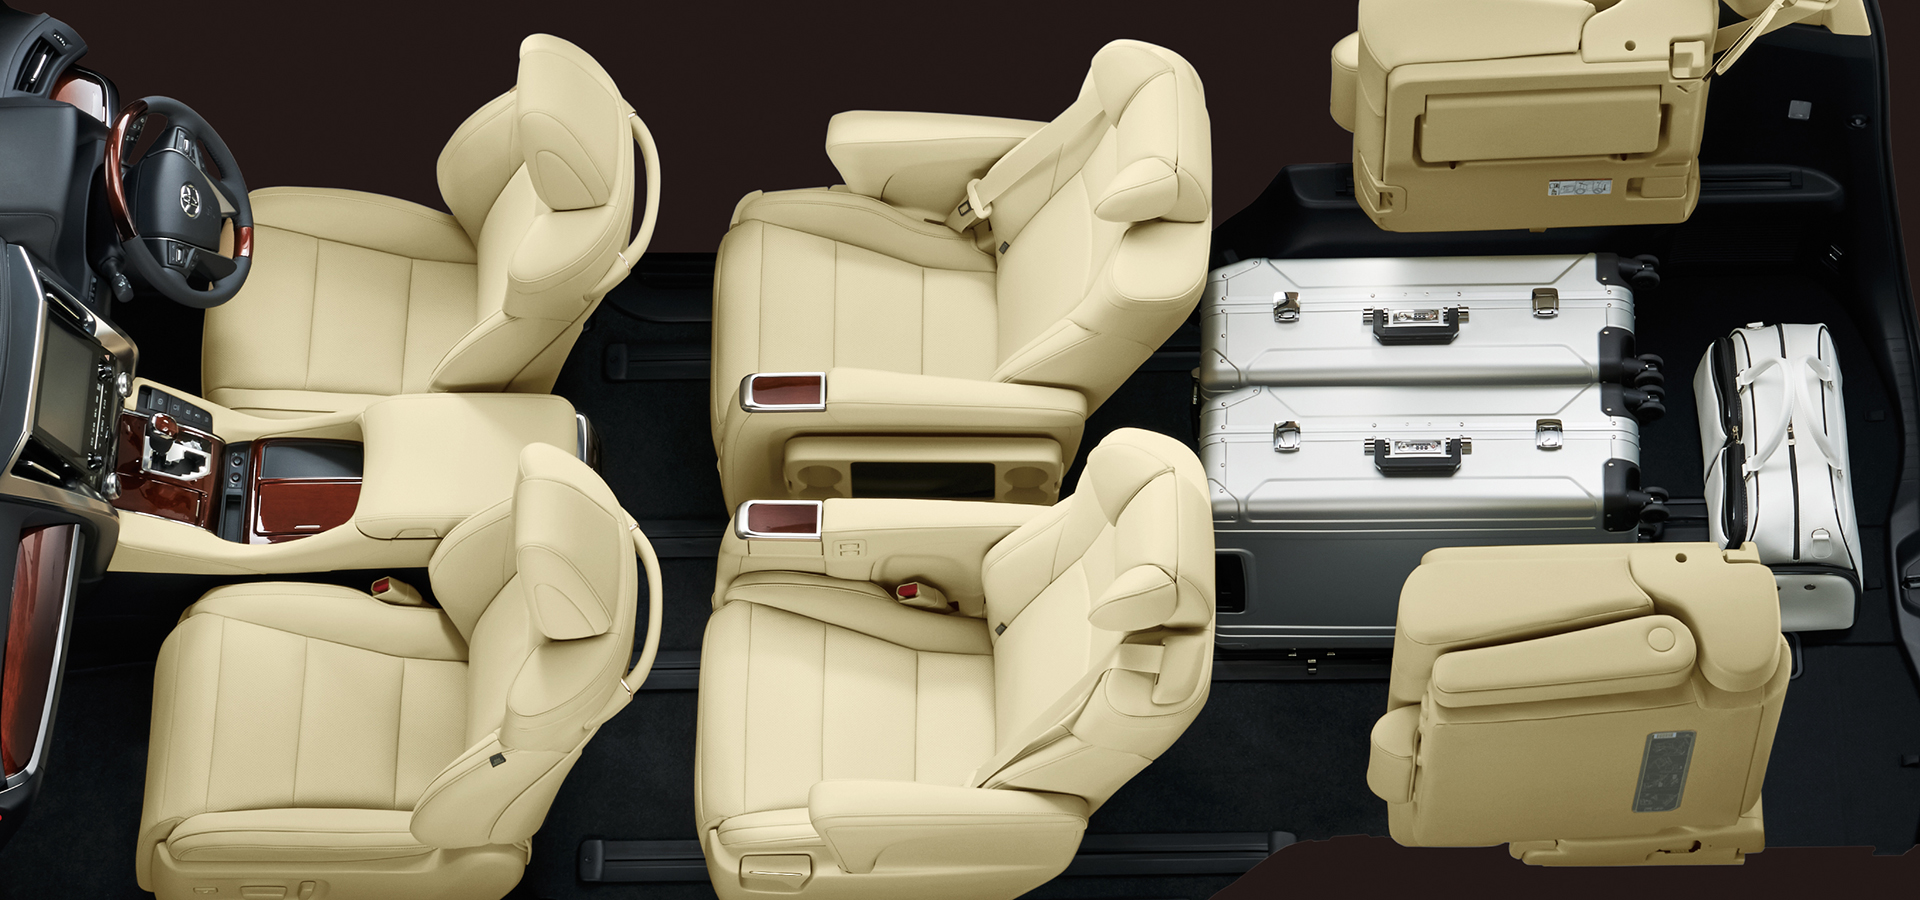 Alphard seating configuration (third-row seats retracted to maximize cargo space)